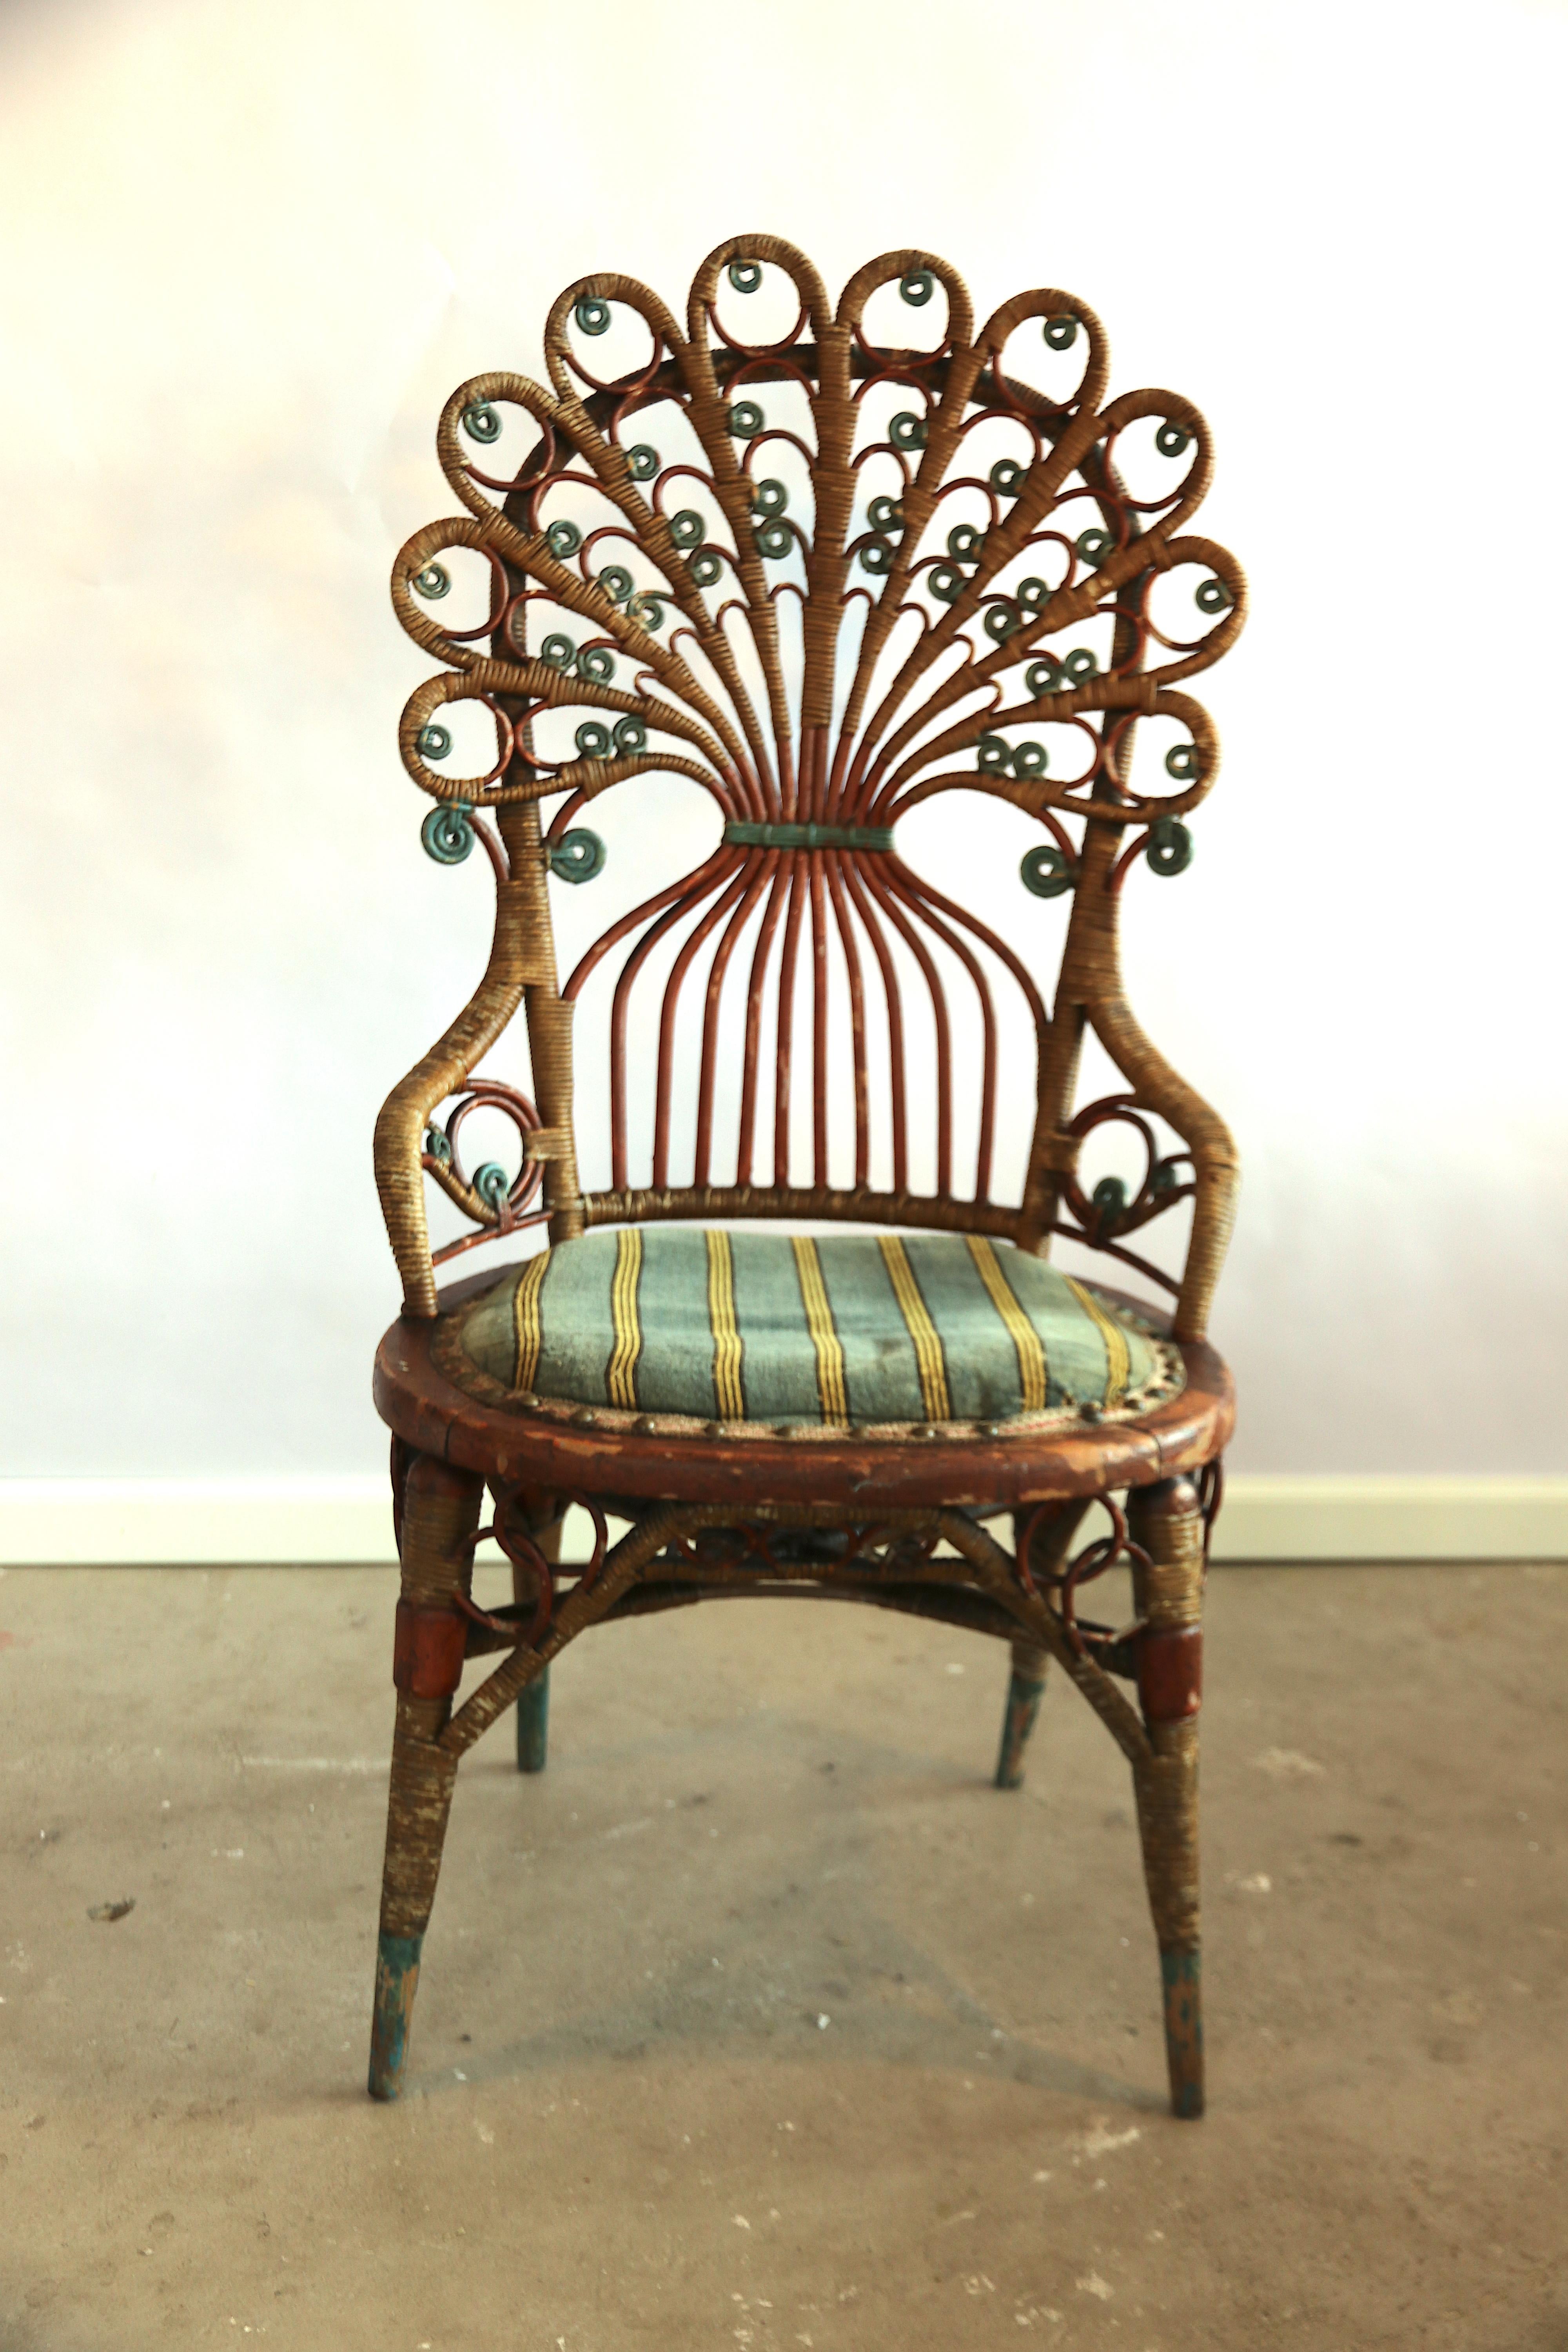 Amazing semi armchair in the shape of a peacock tail from the beginning of the 20th century. This is a very rare art-nouveau époque antique chair; which regarding the age is in an amazing condition with an equally amazing patina according to the age